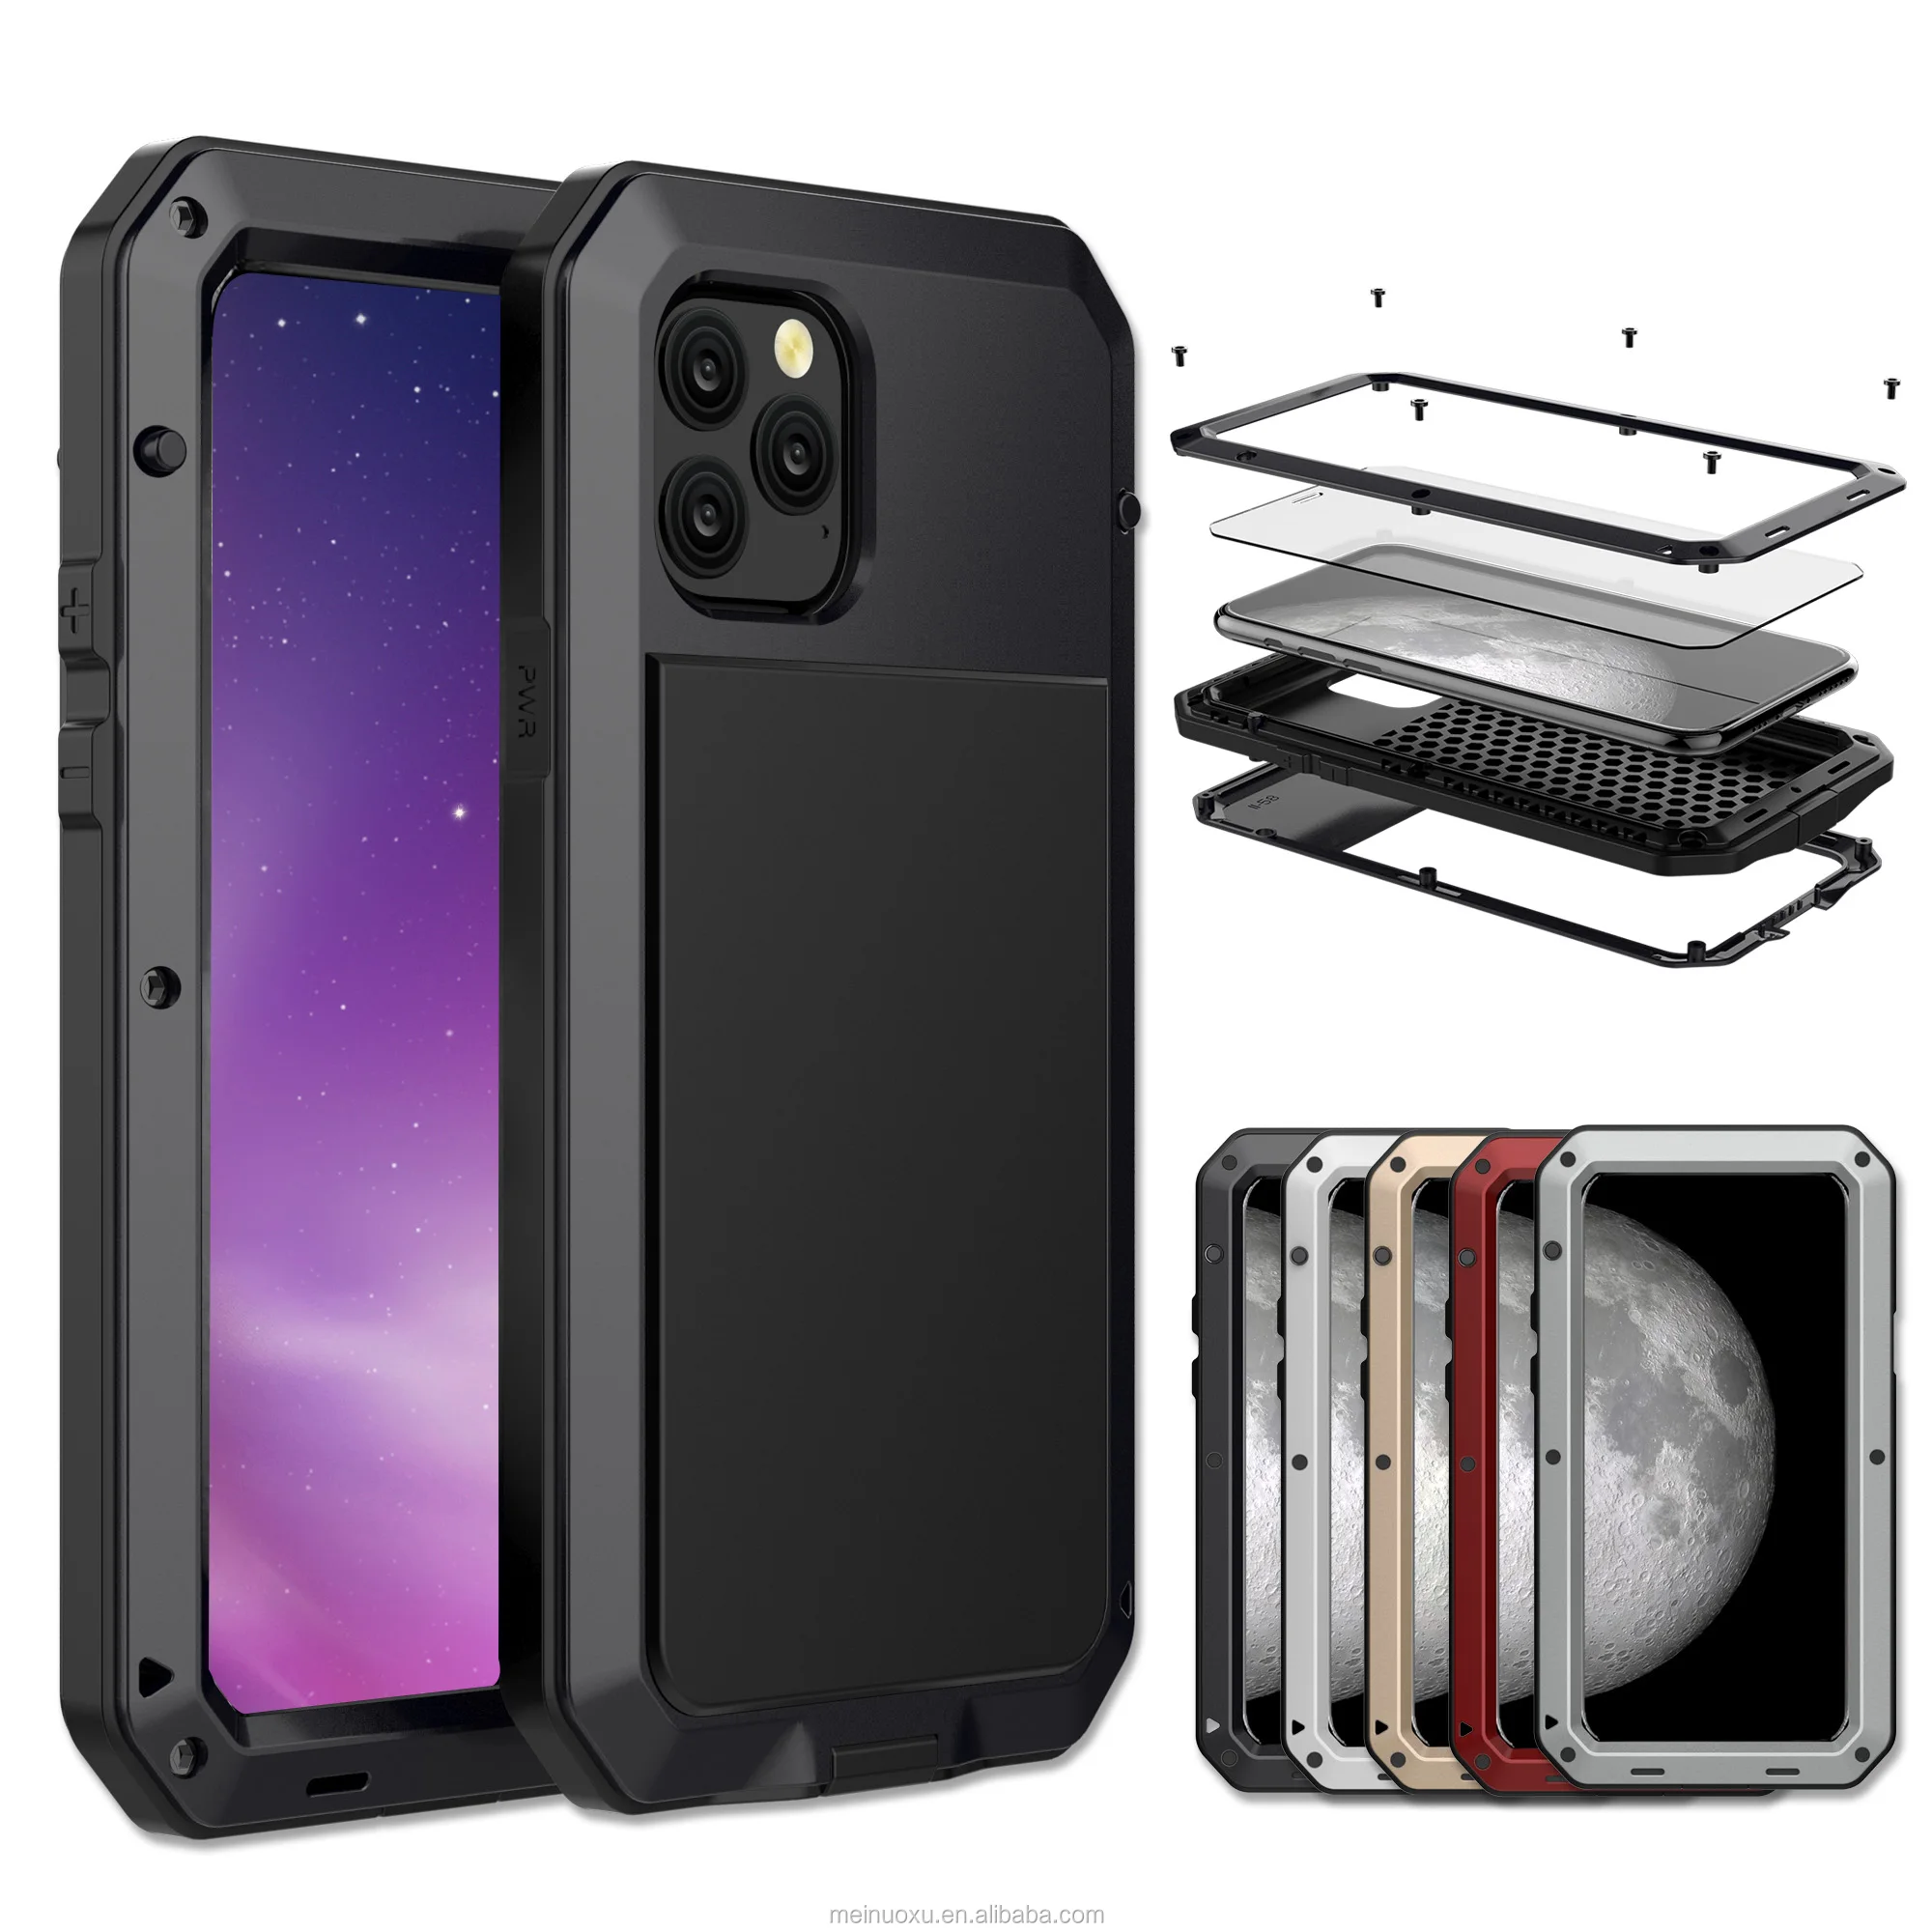 Metal Steel Machinery Series Cases For iPhone 11 Pro Max Heavy Duty Armor  Aluminum For iPhone 11 iPhone11 Pro Max CASE Cover - AliExpress